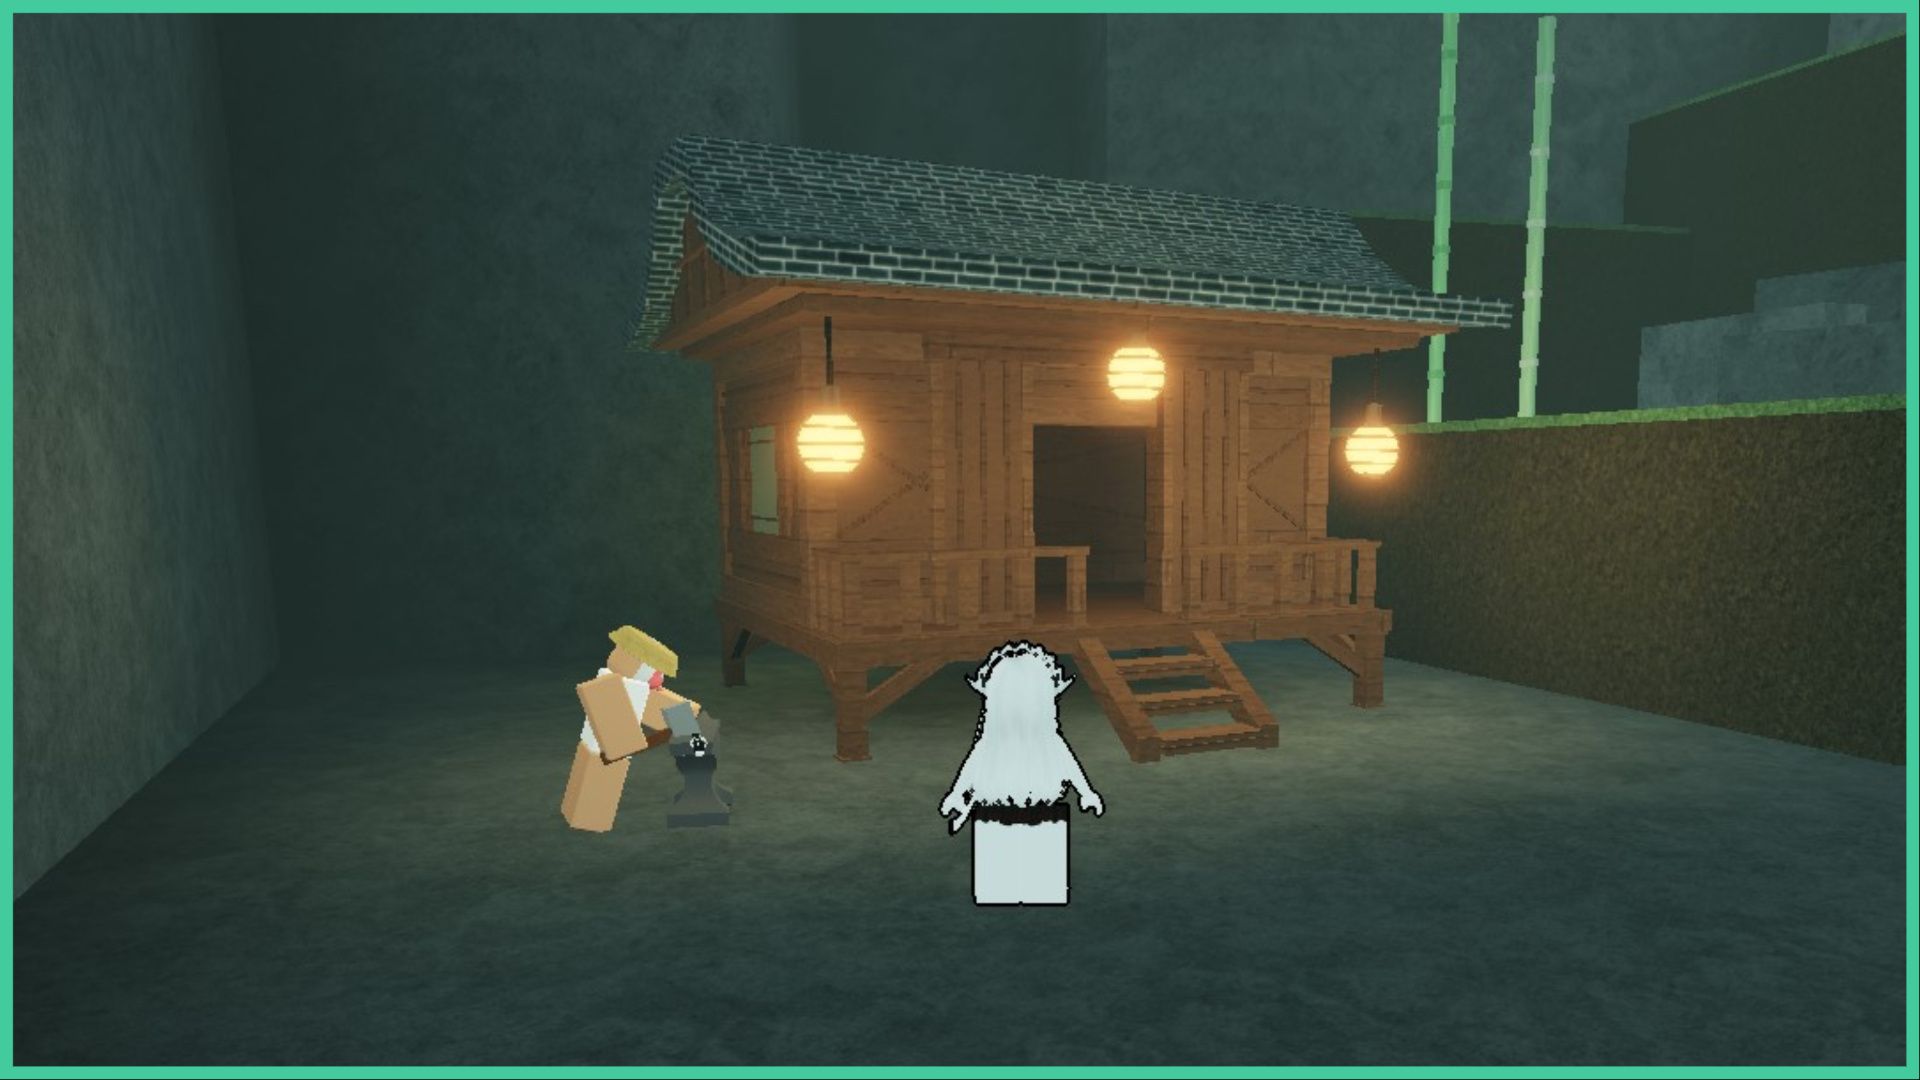 feature image for our rogue demon waterfall code guide, the image features a screenshot from the game of a player standing by the swordsmith who is using the anvil outside a small wooden building that has a small set of stairs leading to the door and is lit up by 3 lanterns attached to the roof